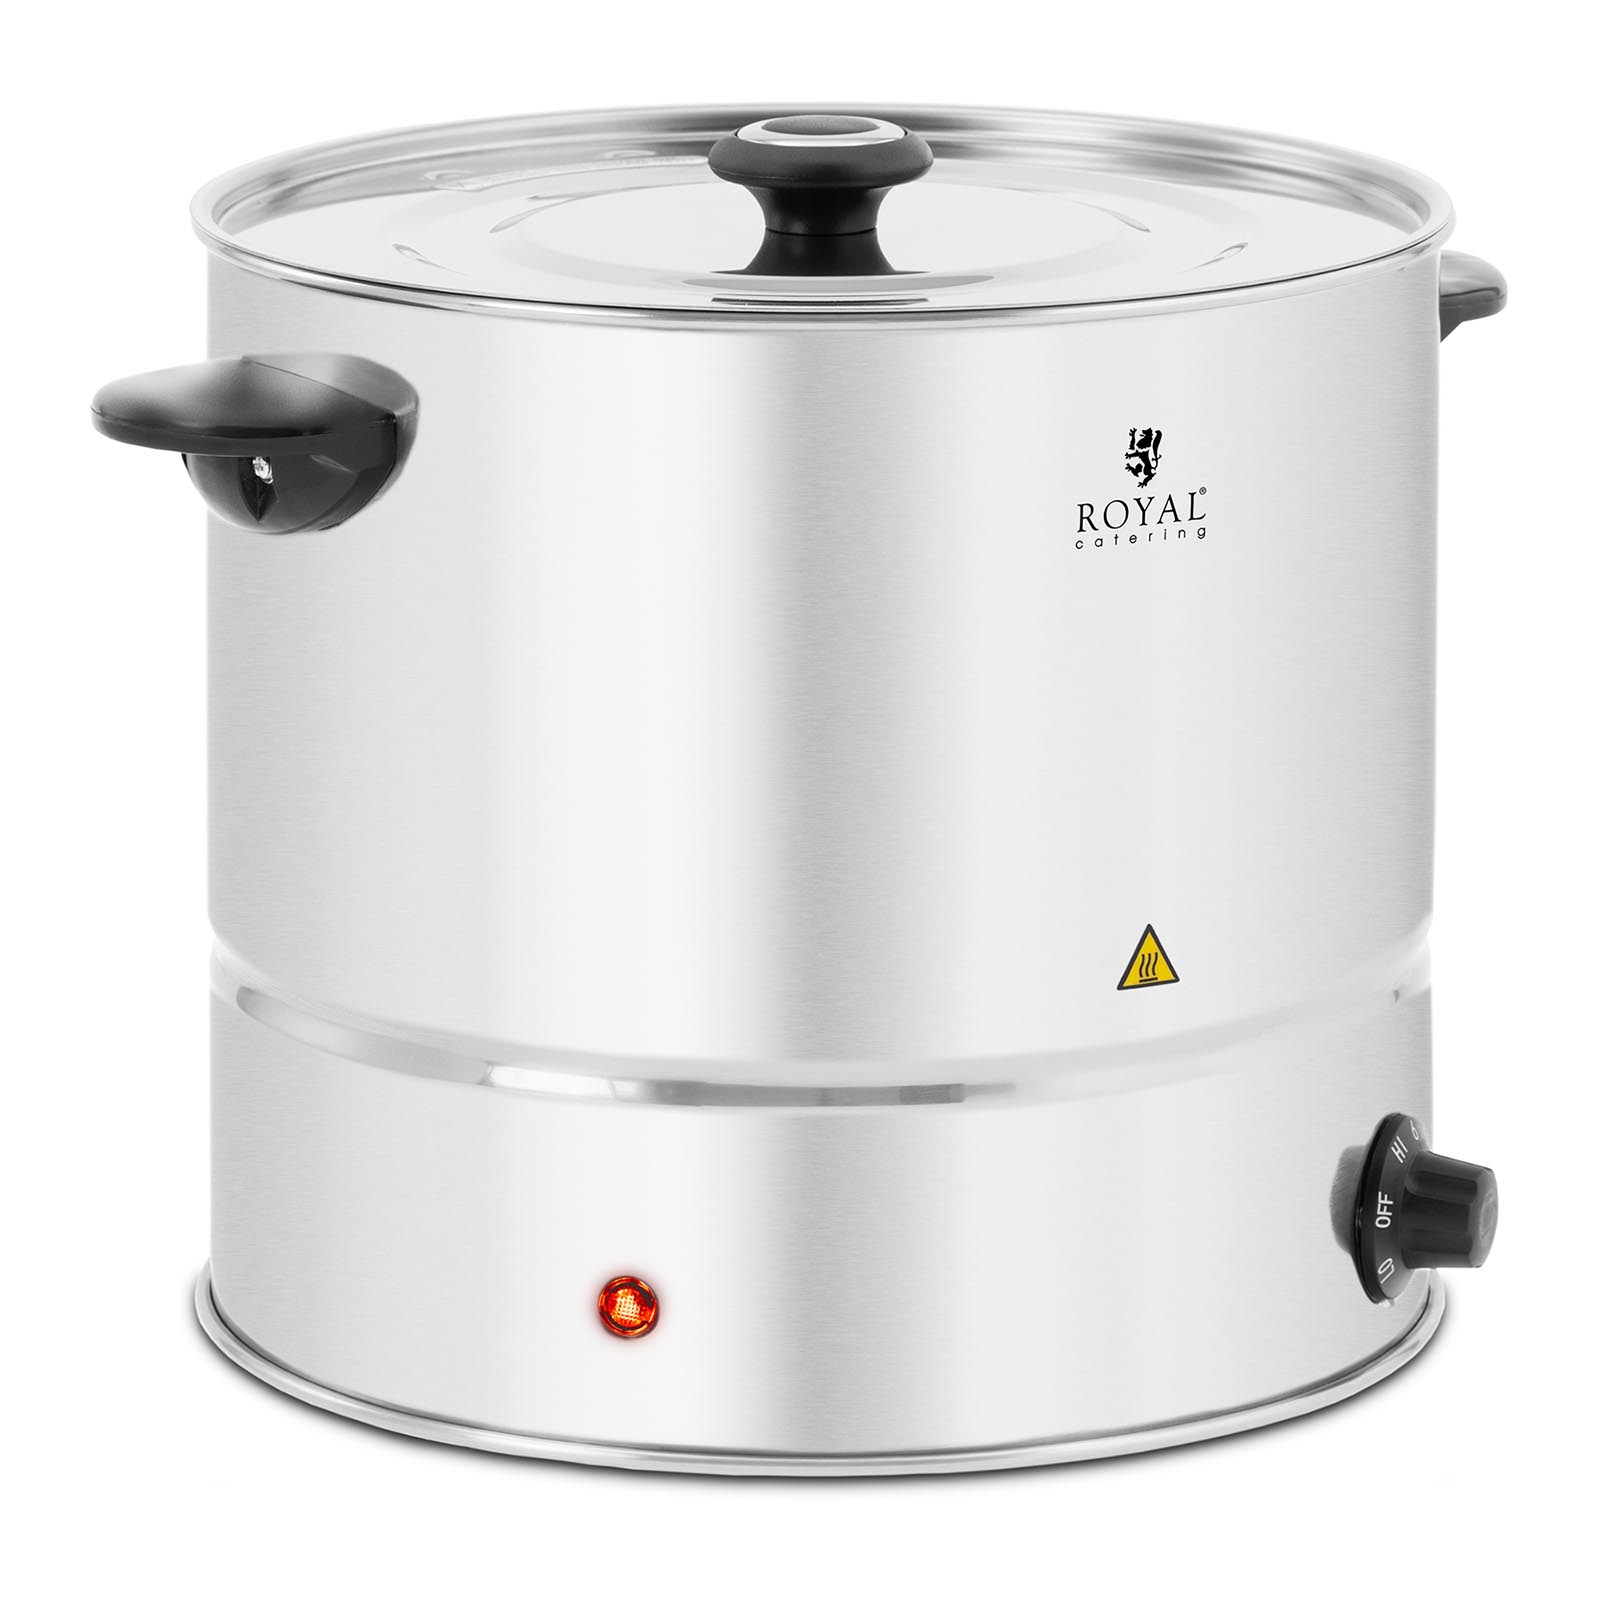 Steamer - 13 L - 1000 W - Royal Catering